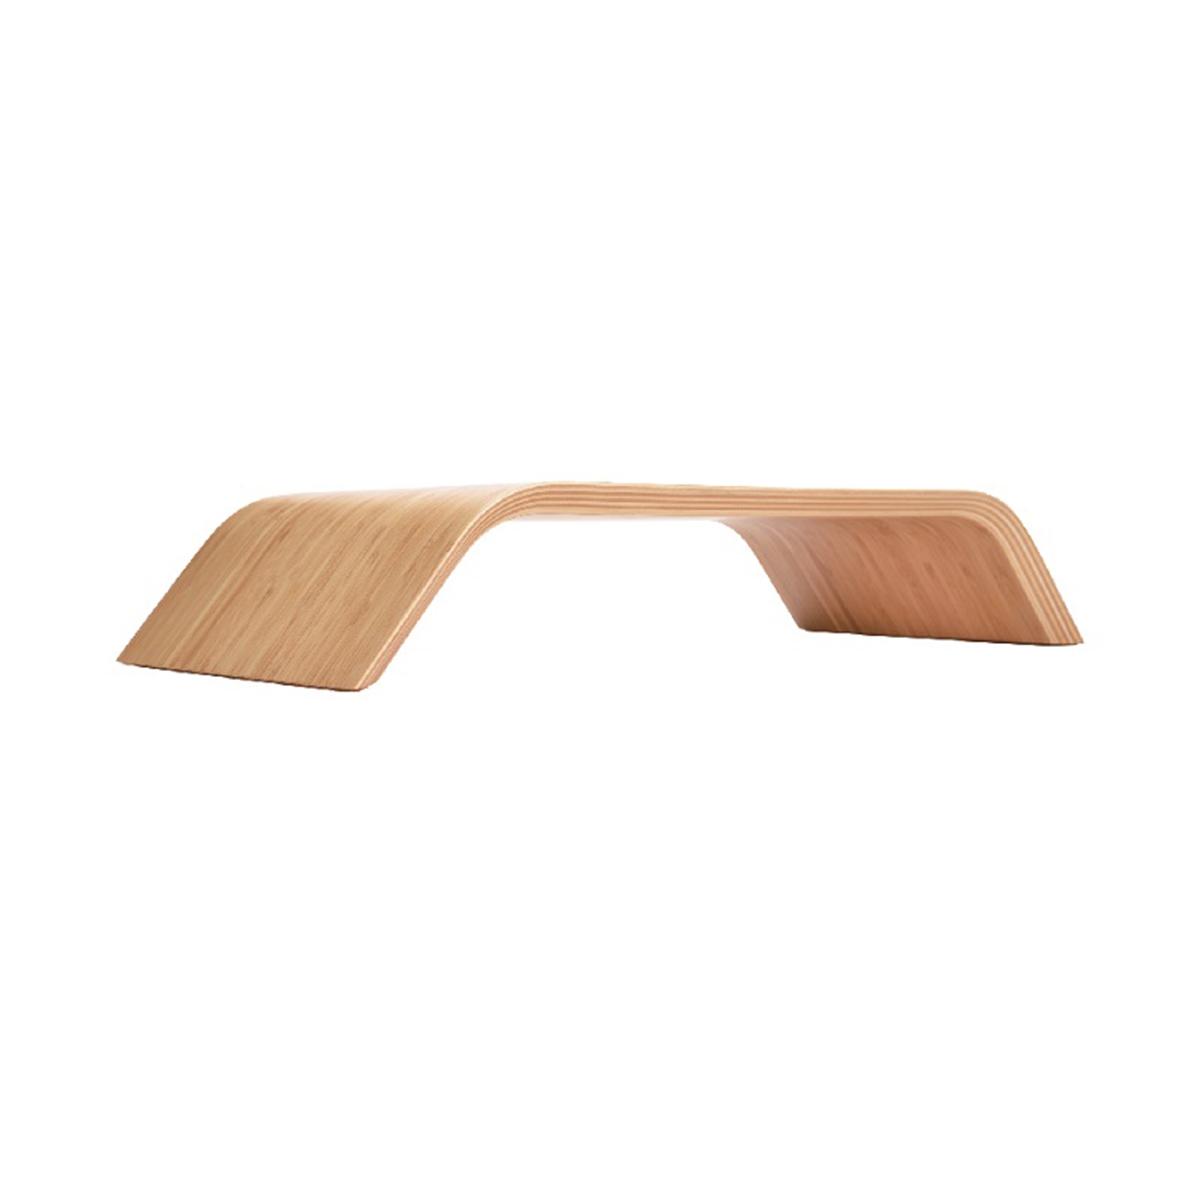 SAMDI Bamboo Monitor Stand For Macbook / Other Laptops / PC / Monitor